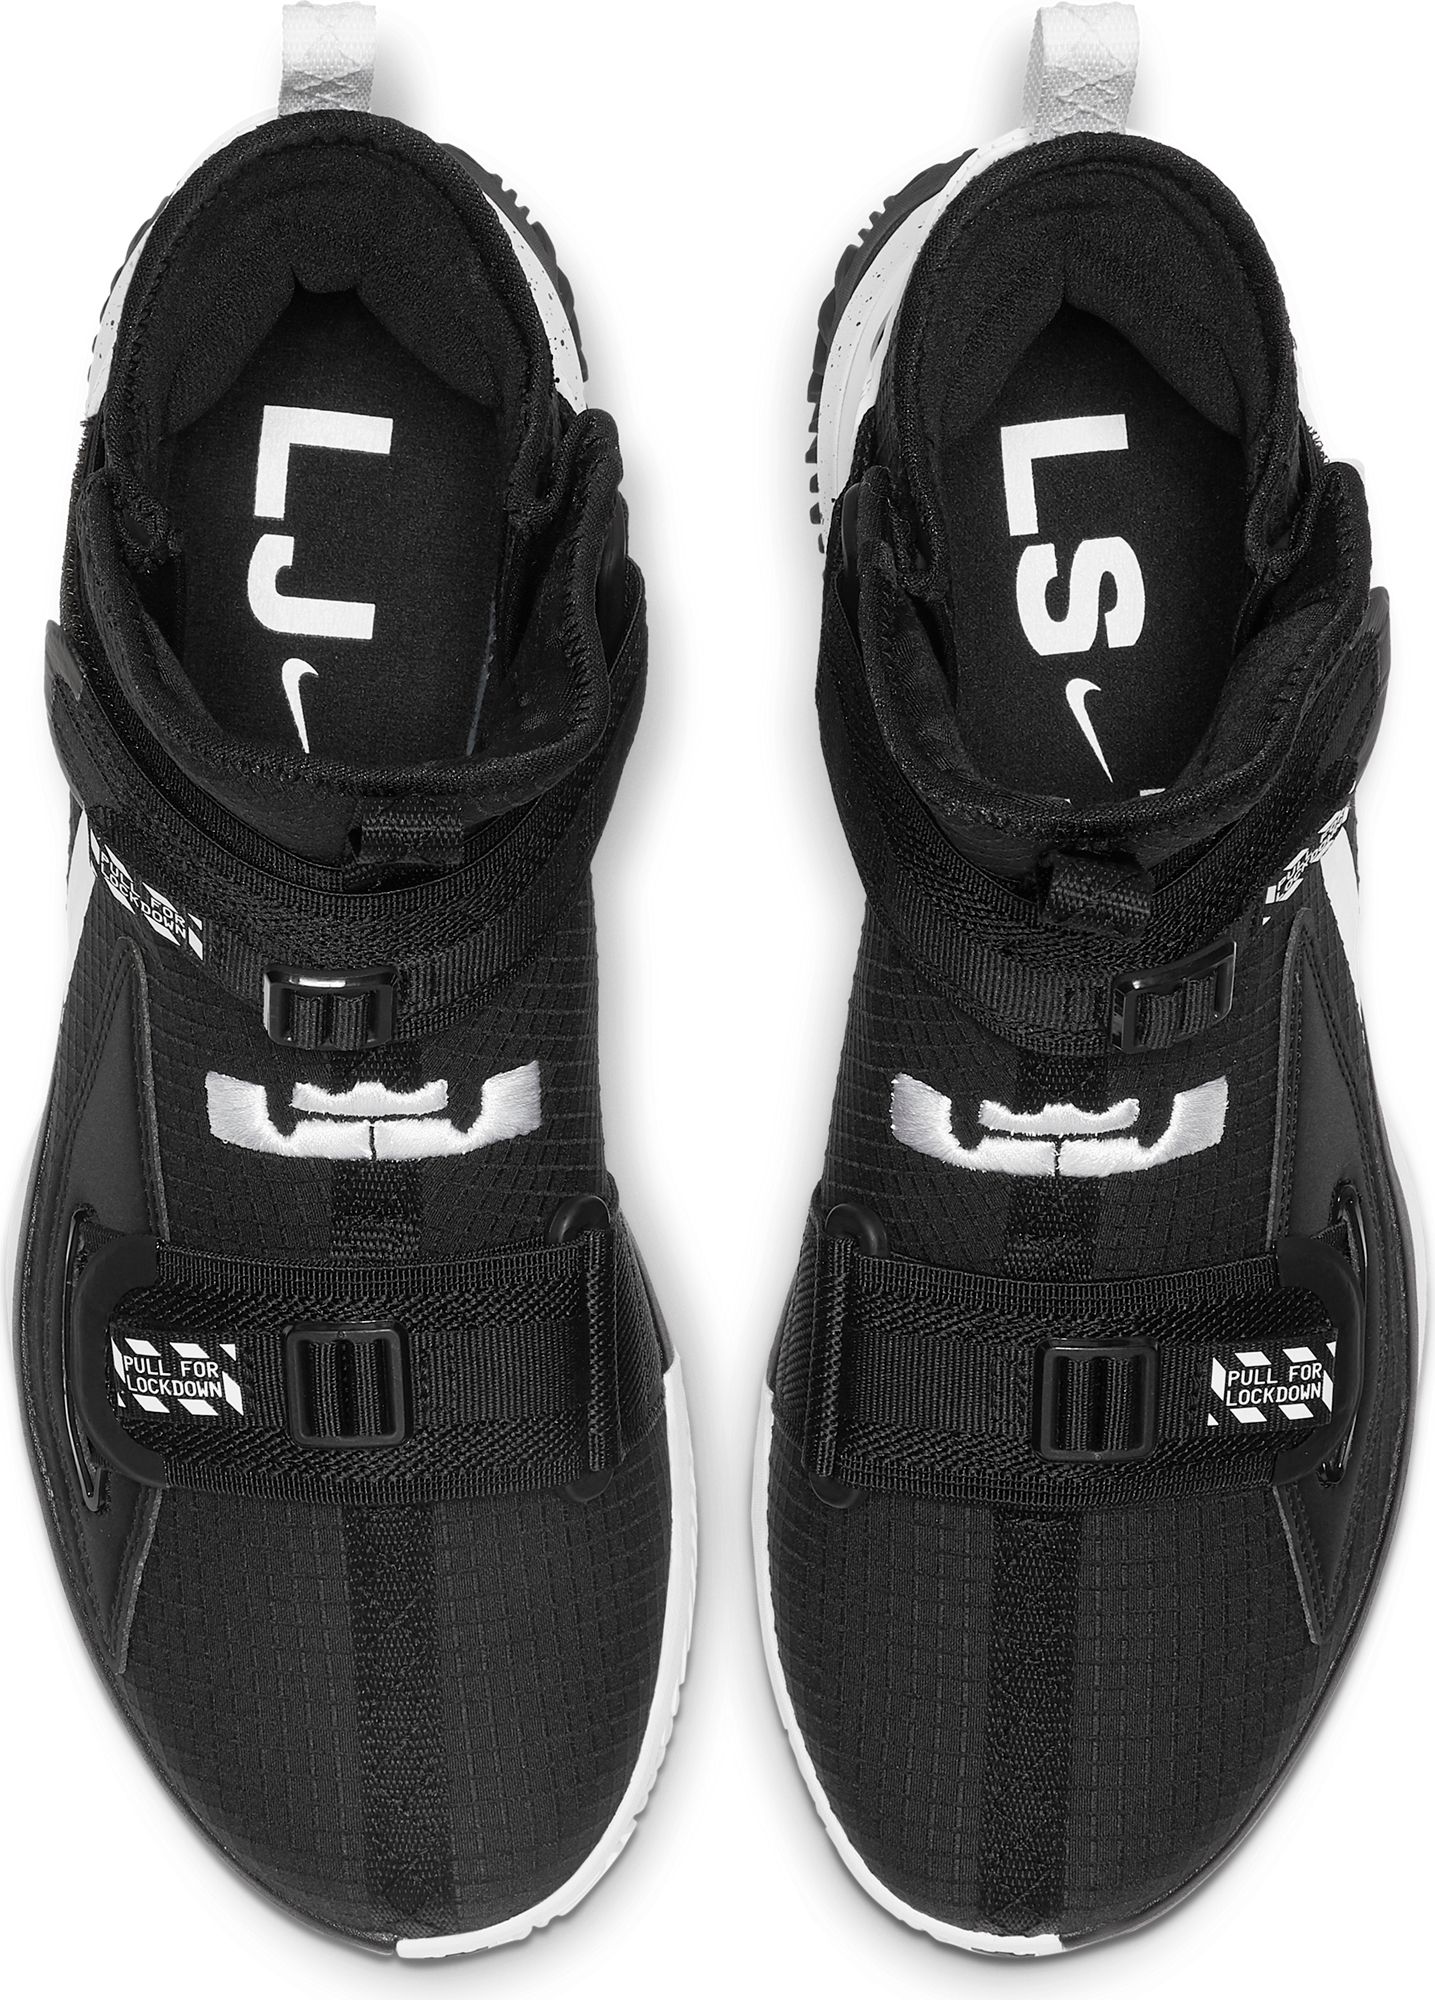 lebron soldier 13 sfg black and white